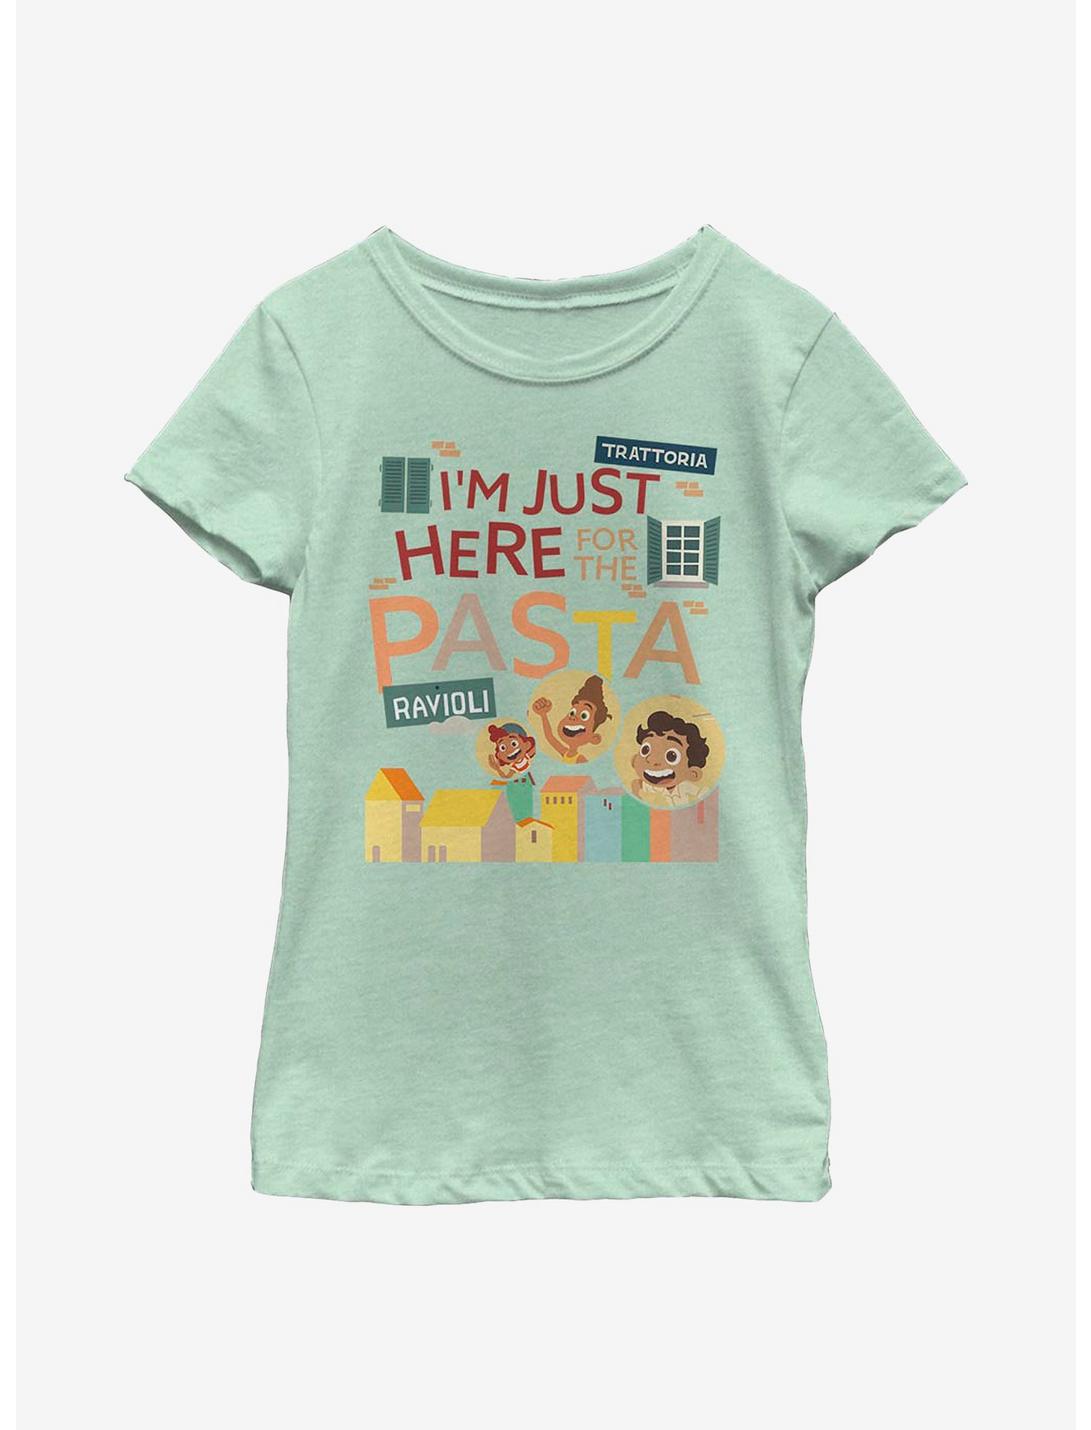 Disney Pixar Luca I'm Just Here For The Pasta Youth Girls T-Shirt, MINT, hi-res